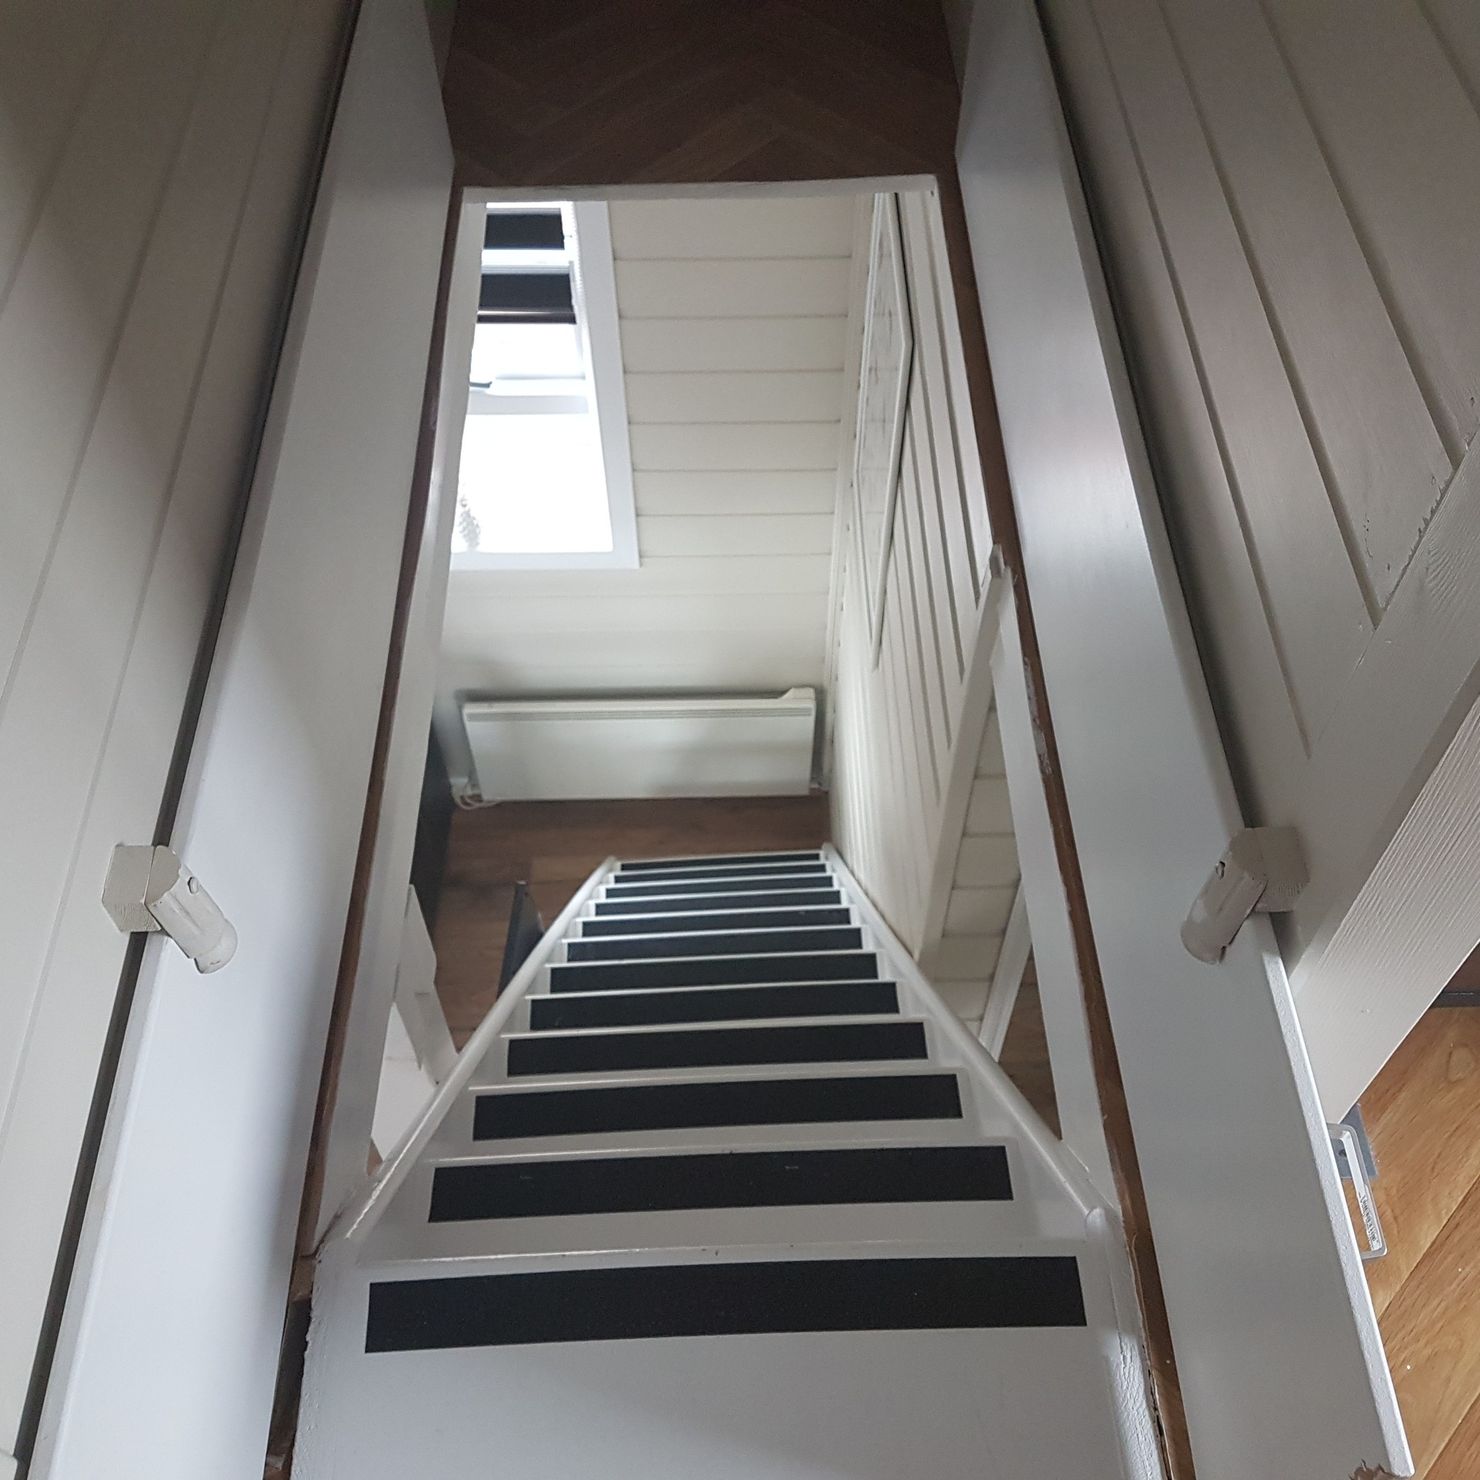 The lovingly designed stairs to the attic